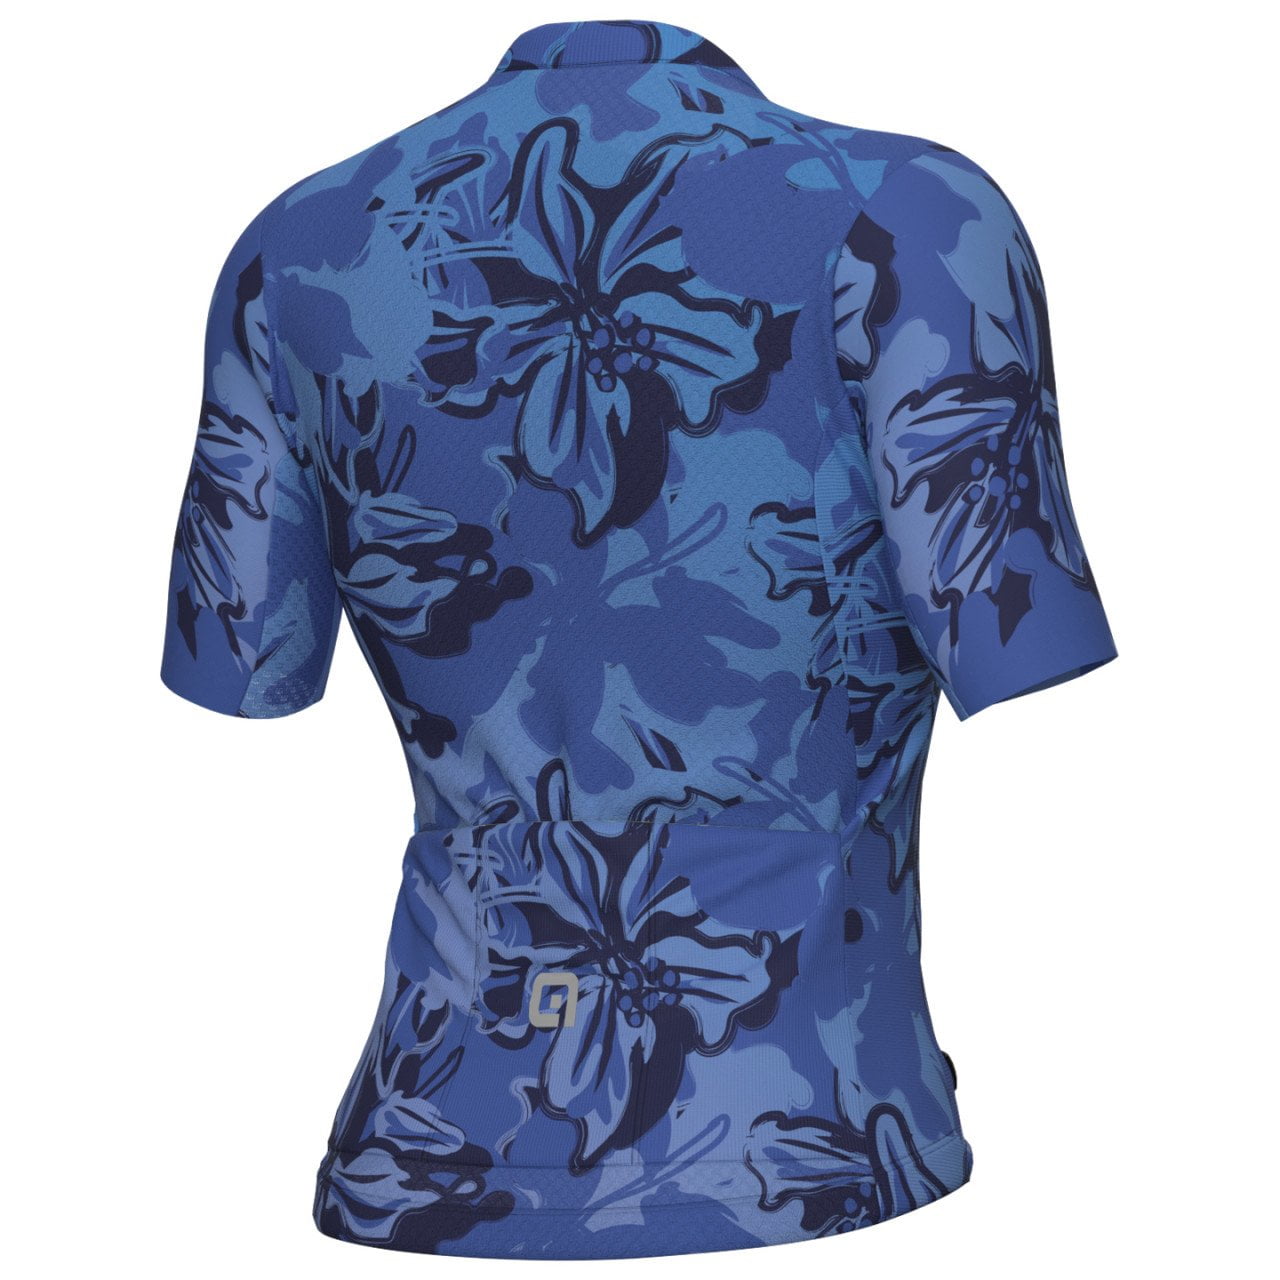 Maillot manches courtes femme Honolulu